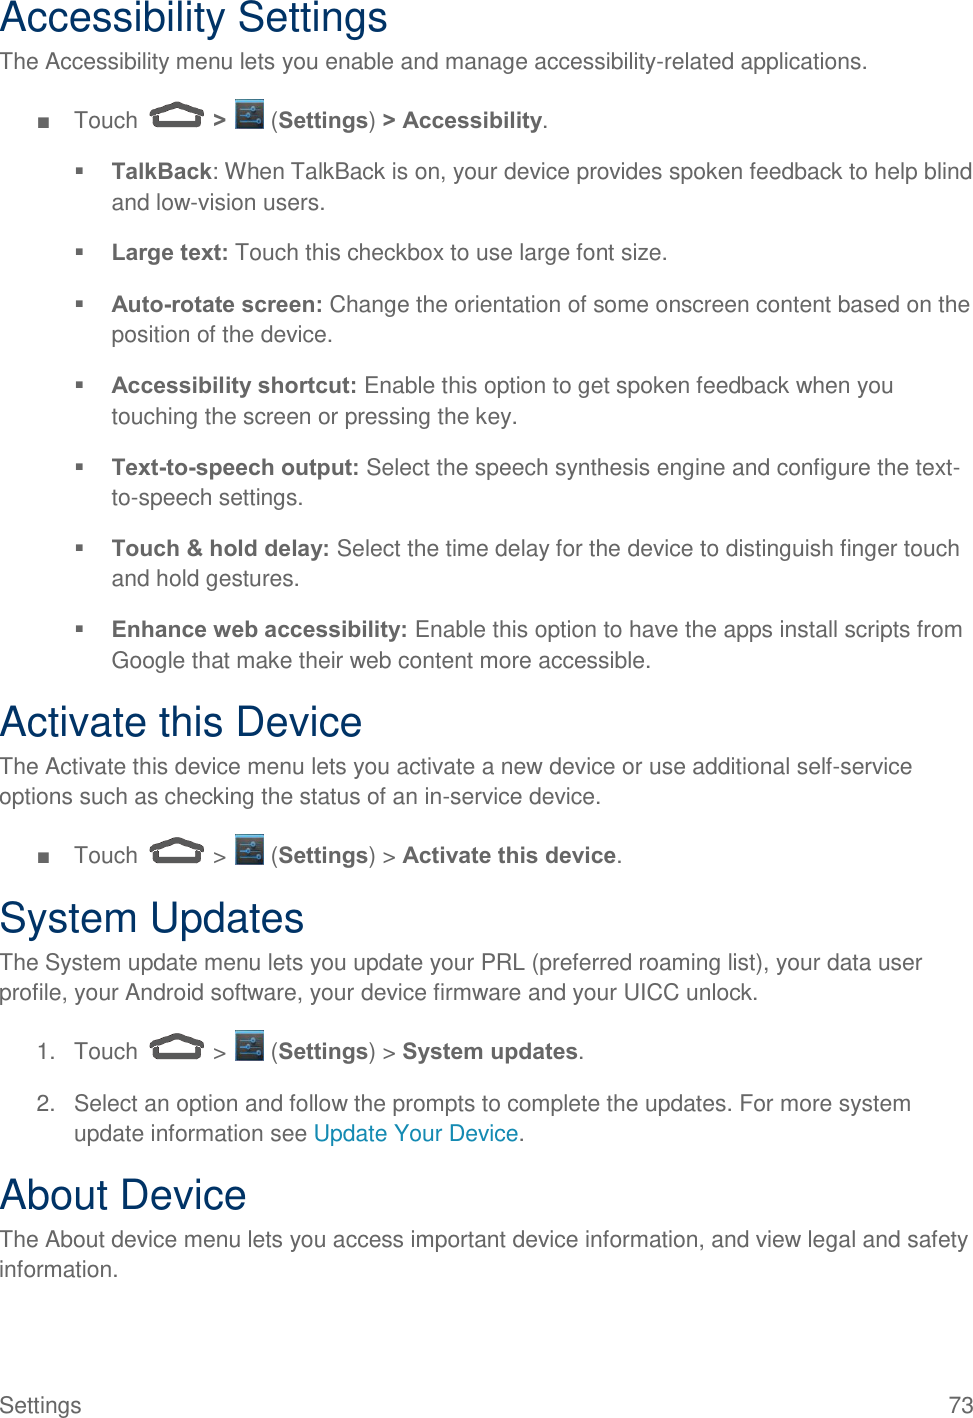  Settings  73 Accessibility Settings The Accessibility menu lets you enable and manage accessibility-related applications. ■  Touch   &gt;   (Settings) &gt; Accessibility.  TalkBack: When TalkBack is on, your device provides spoken feedback to help blind and low-vision users.  Large text: Touch this checkbox to use large font size.  Auto-rotate screen: Change the orientation of some onscreen content based on the position of the device.  Accessibility shortcut: Enable this option to get spoken feedback when you touching the screen or pressing the key.  Text-to-speech output: Select the speech synthesis engine and configure the text-to-speech settings.  Touch &amp; hold delay: Select the time delay for the device to distinguish finger touch and hold gestures.  Enhance web accessibility: Enable this option to have the apps install scripts from Google that make their web content more accessible. Activate this Device The Activate this device menu lets you activate a new device or use additional self-service options such as checking the status of an in-service device. ■  Touch   &gt;   (Settings) &gt; Activate this device. System Updates The System update menu lets you update your PRL (preferred roaming list), your data user profile, your Android software, your device firmware and your UICC unlock. 1.  Touch   &gt;   (Settings) &gt; System updates. 2.  Select an option and follow the prompts to complete the updates. For more system update information see Update Your Device. About Device The About device menu lets you access important device information, and view legal and safety information. 